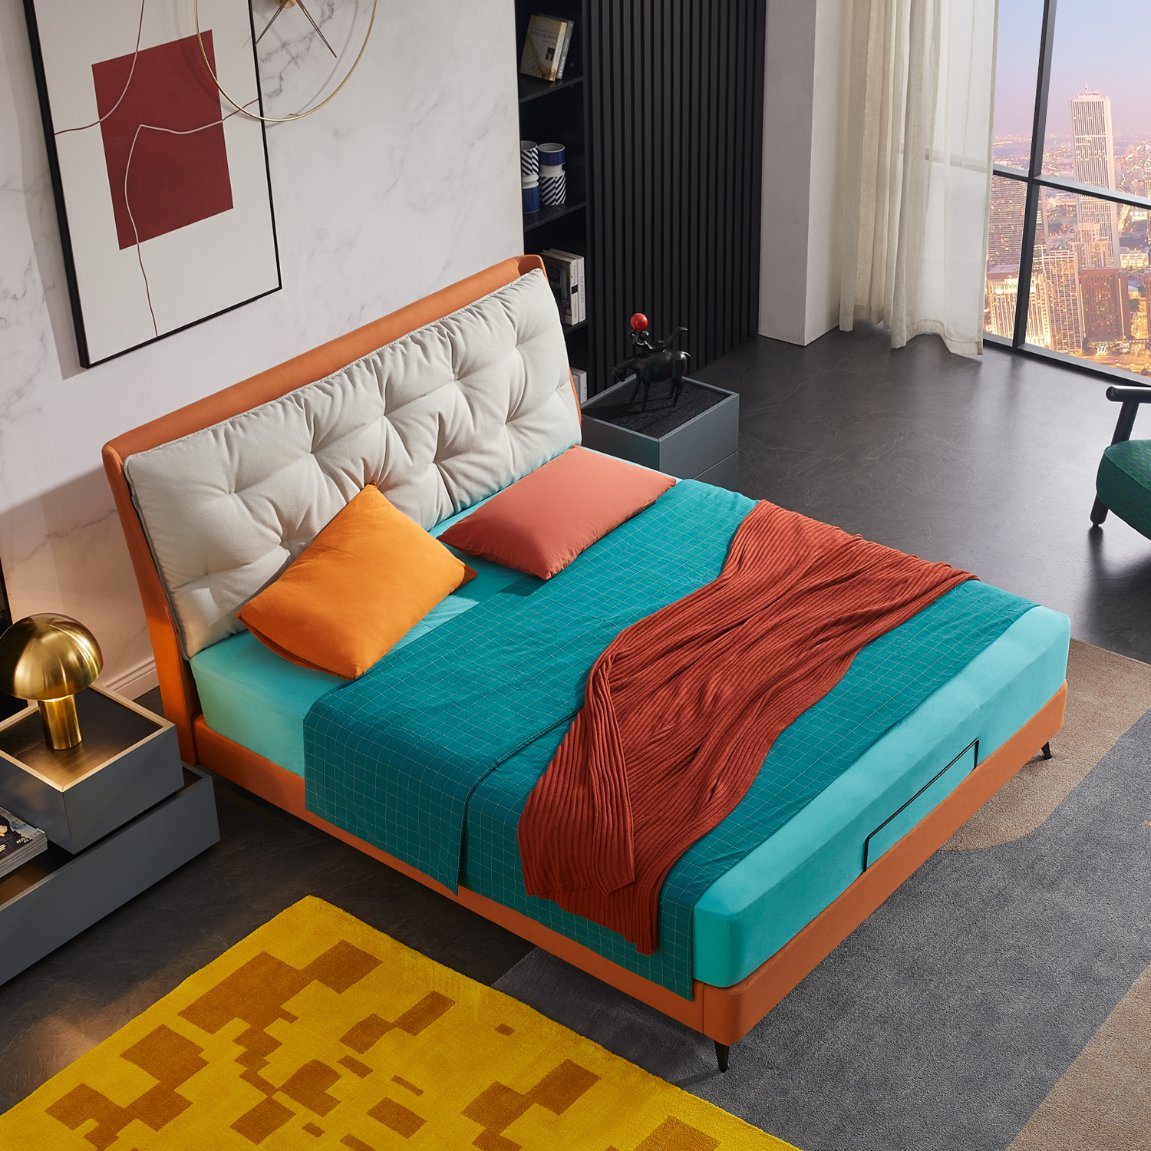 Modern Home Furnitue King Size Queen Size Bed Hotel Double Size Bed Bedroom Furniture Wooden Leather Fabric Bedroom Bed